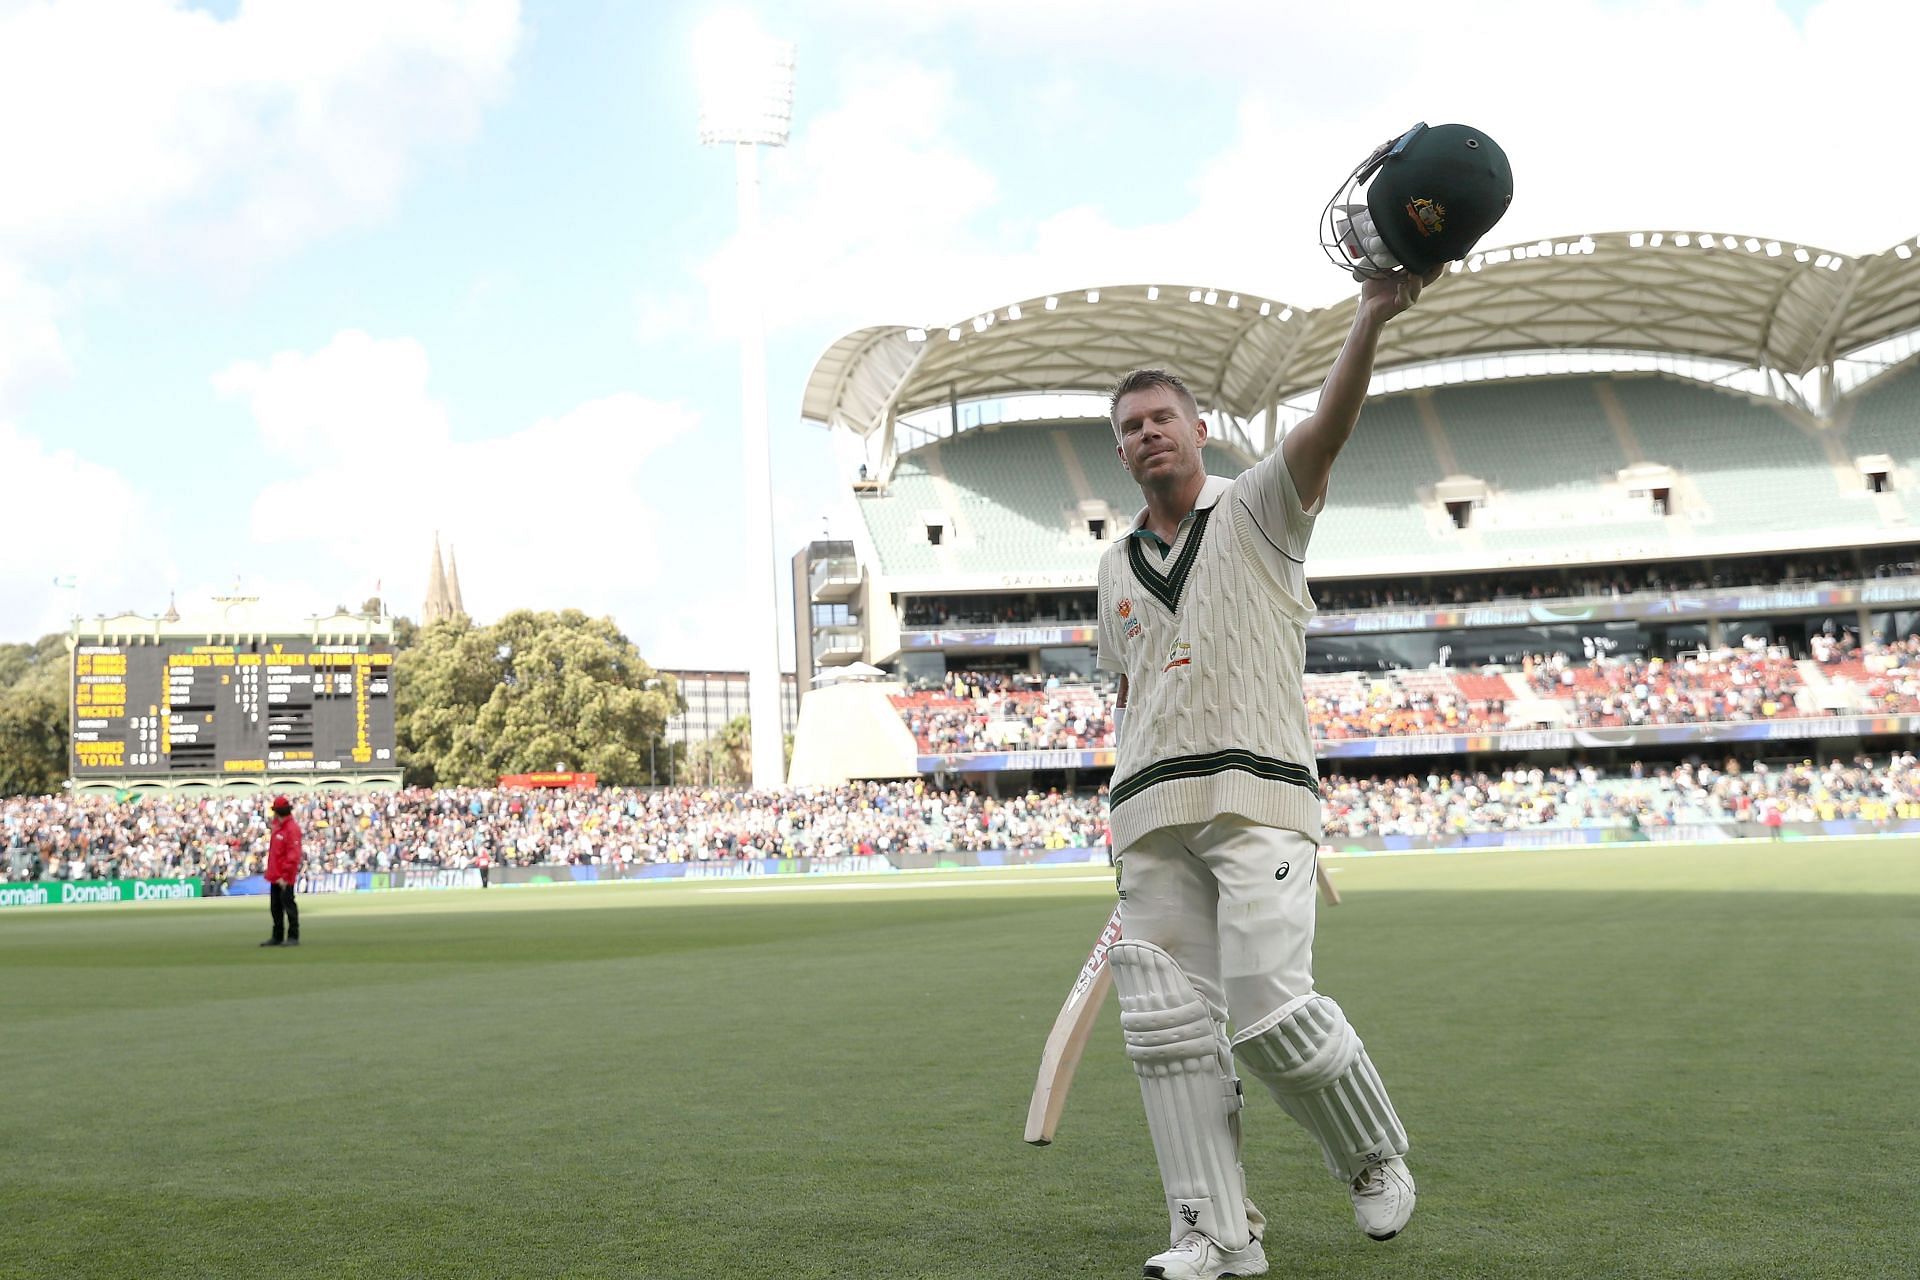 David Warner thanks the crowd after his epic triple century.